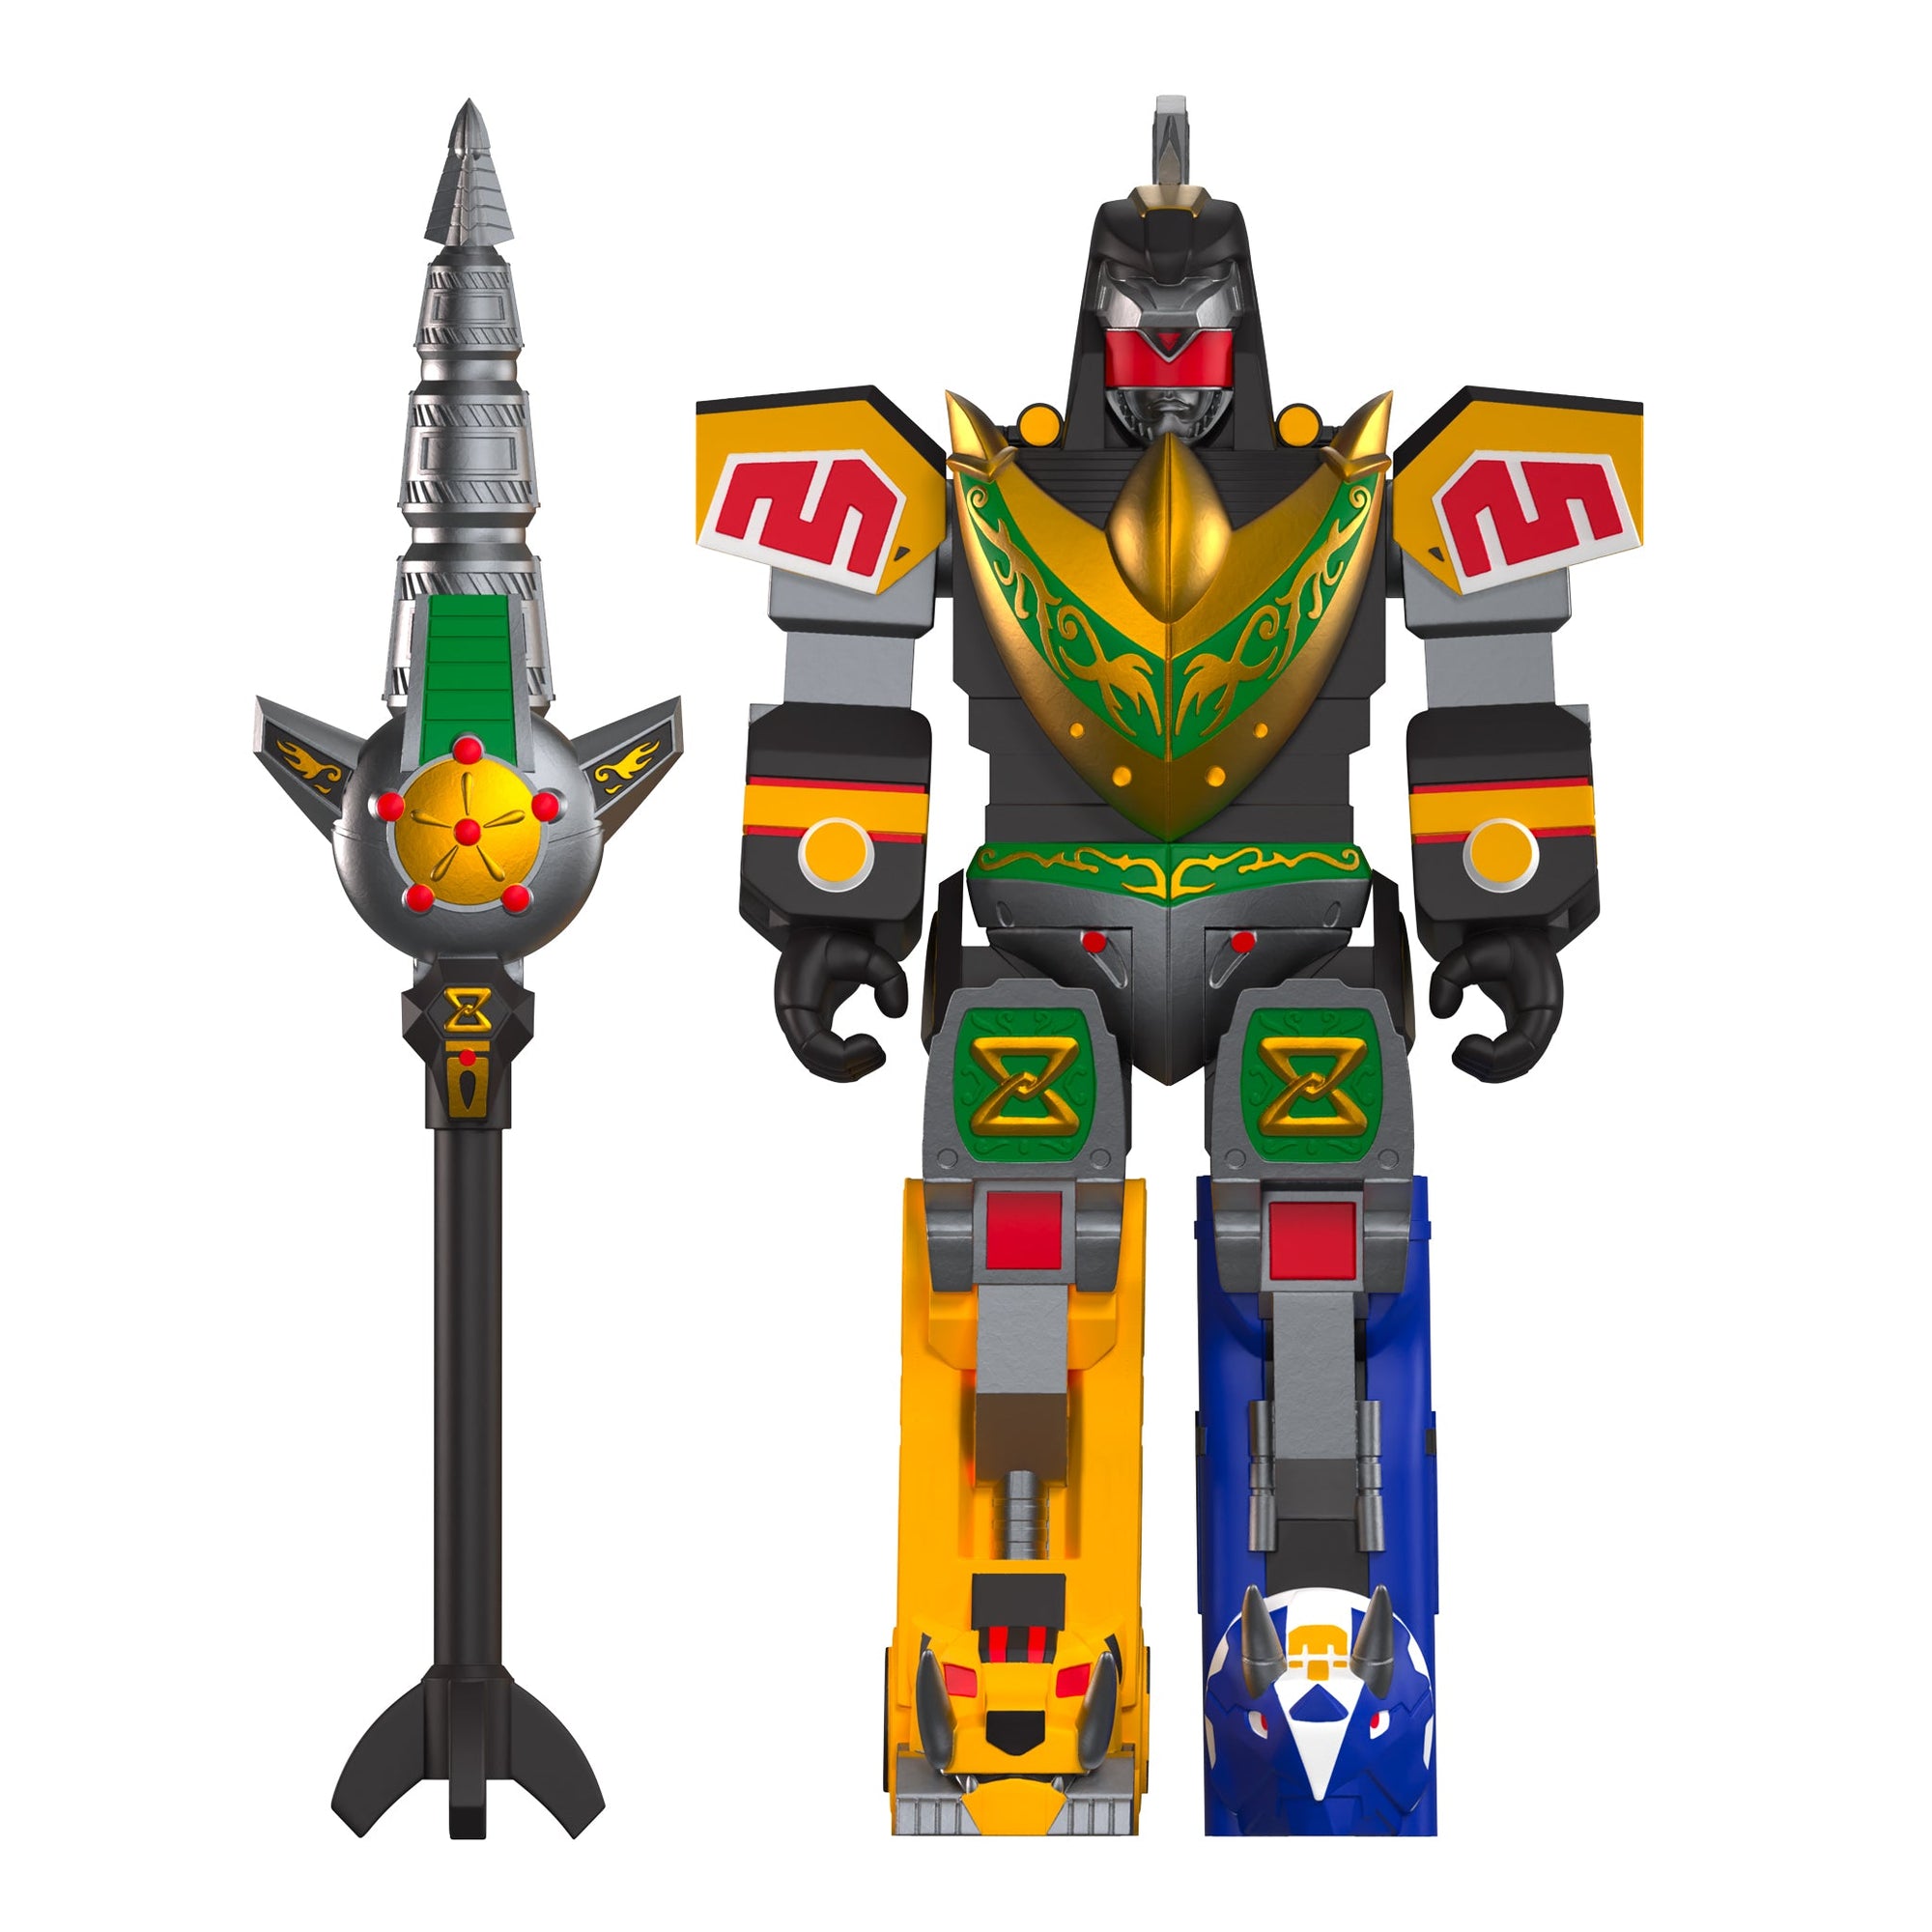 Dragonzord - Mighty Morphin Power Rangers Reaction Figure Wave 3 by Super7